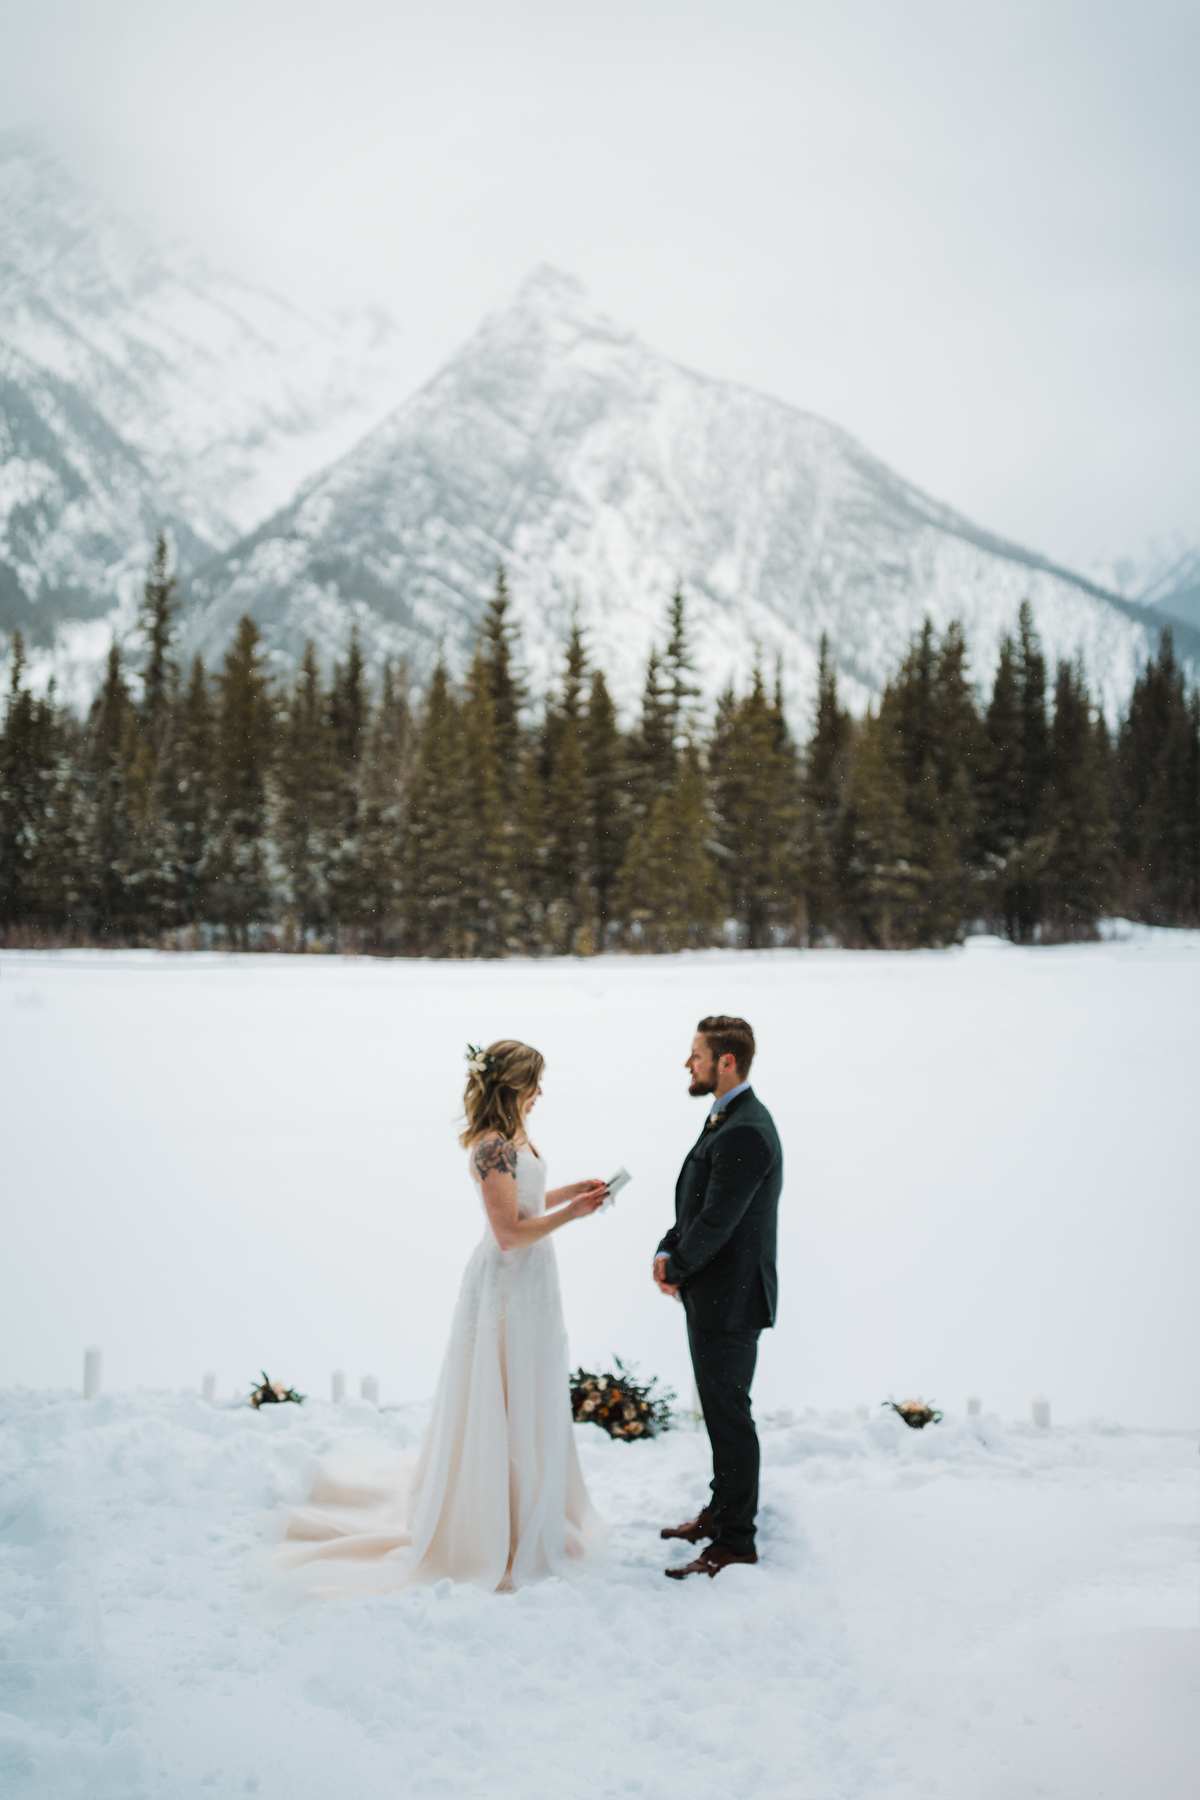 Canmore Elopement Photographer in the Canadian Rockies - Image 27